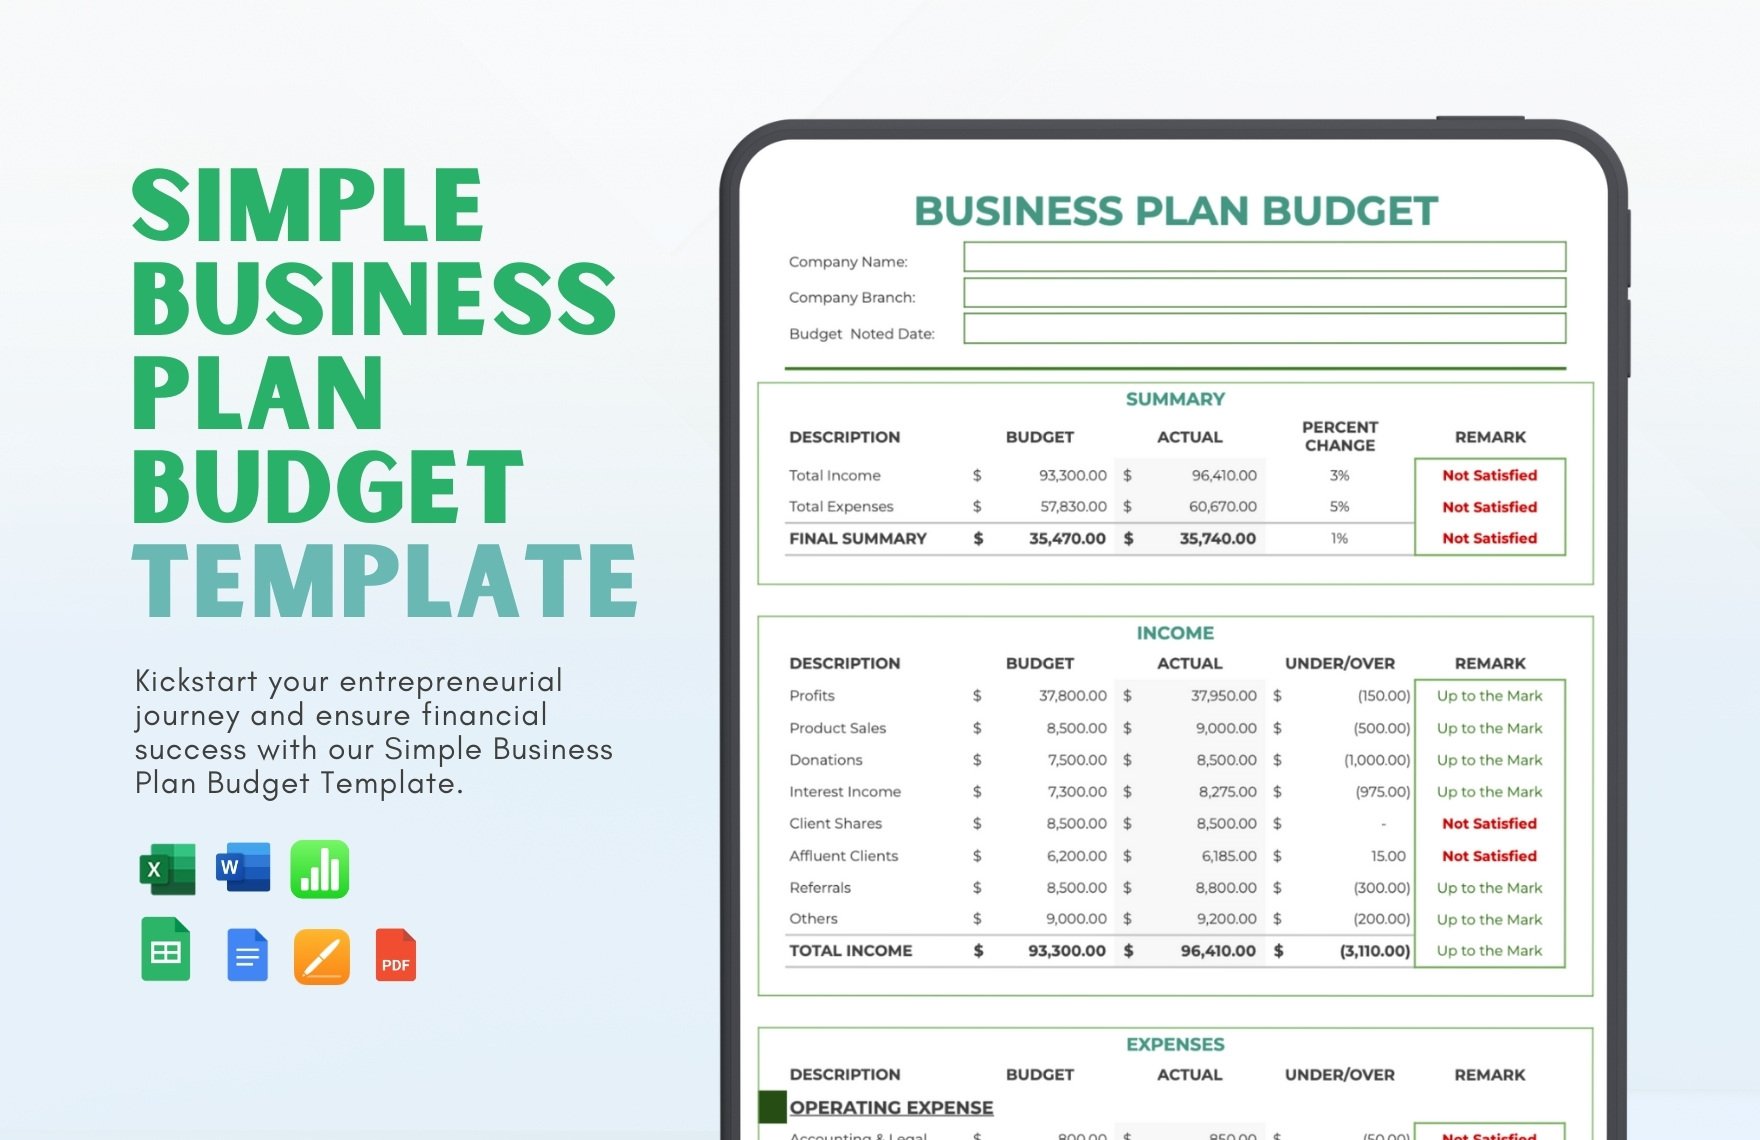 Free Simple Business Plan Budget Template in Word, Google Docs, Excel, PDF, Google Sheets, Apple Pages, Apple Numbers